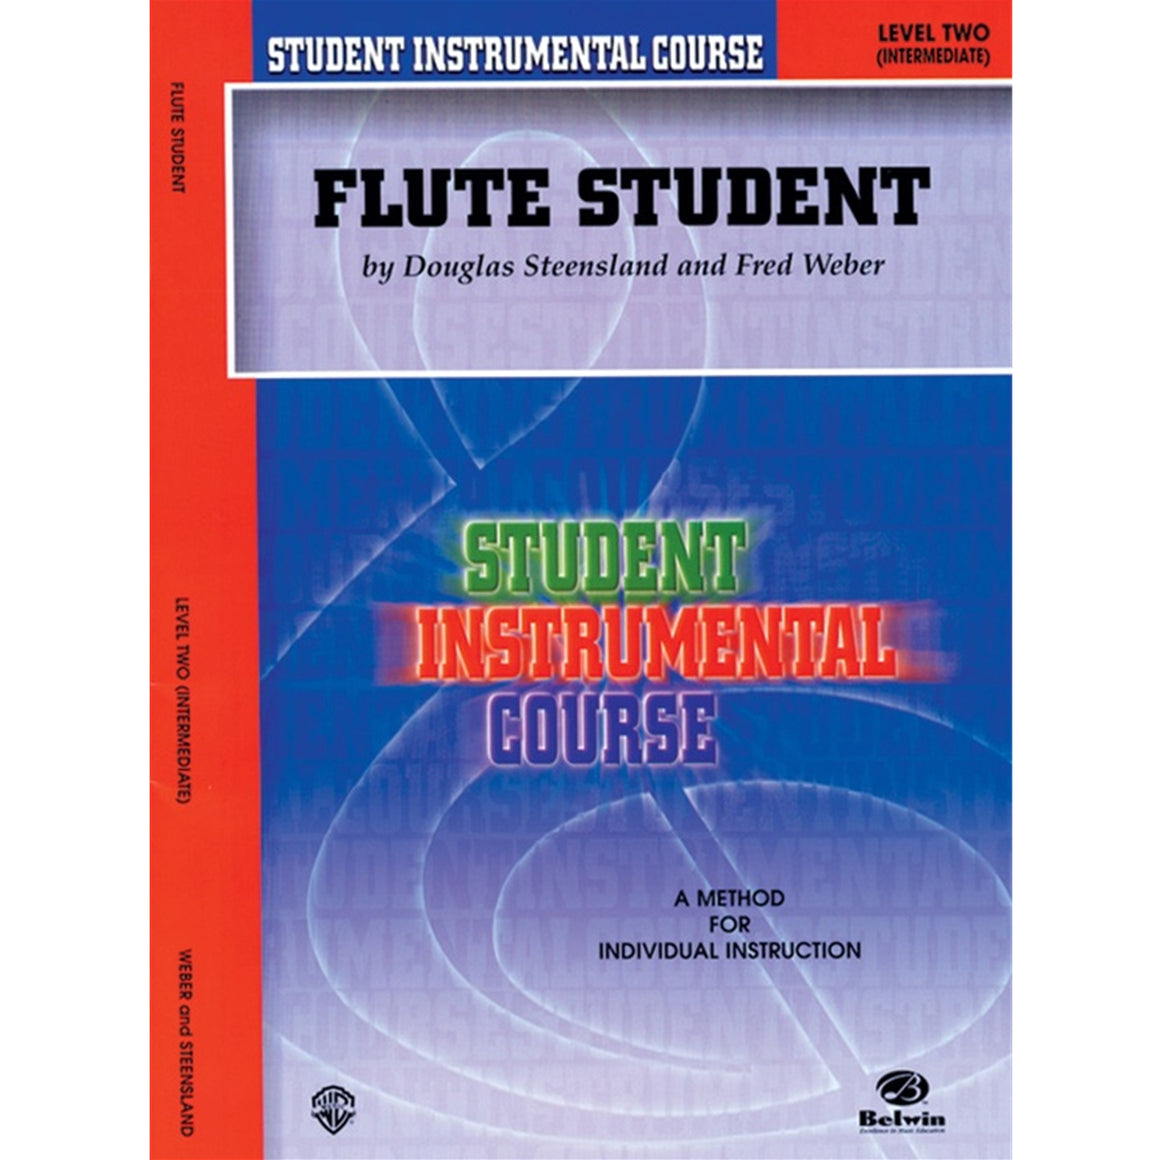 ALFRED BIC00201A Student Instrumental Course: Flute Student, Level II [Flute]